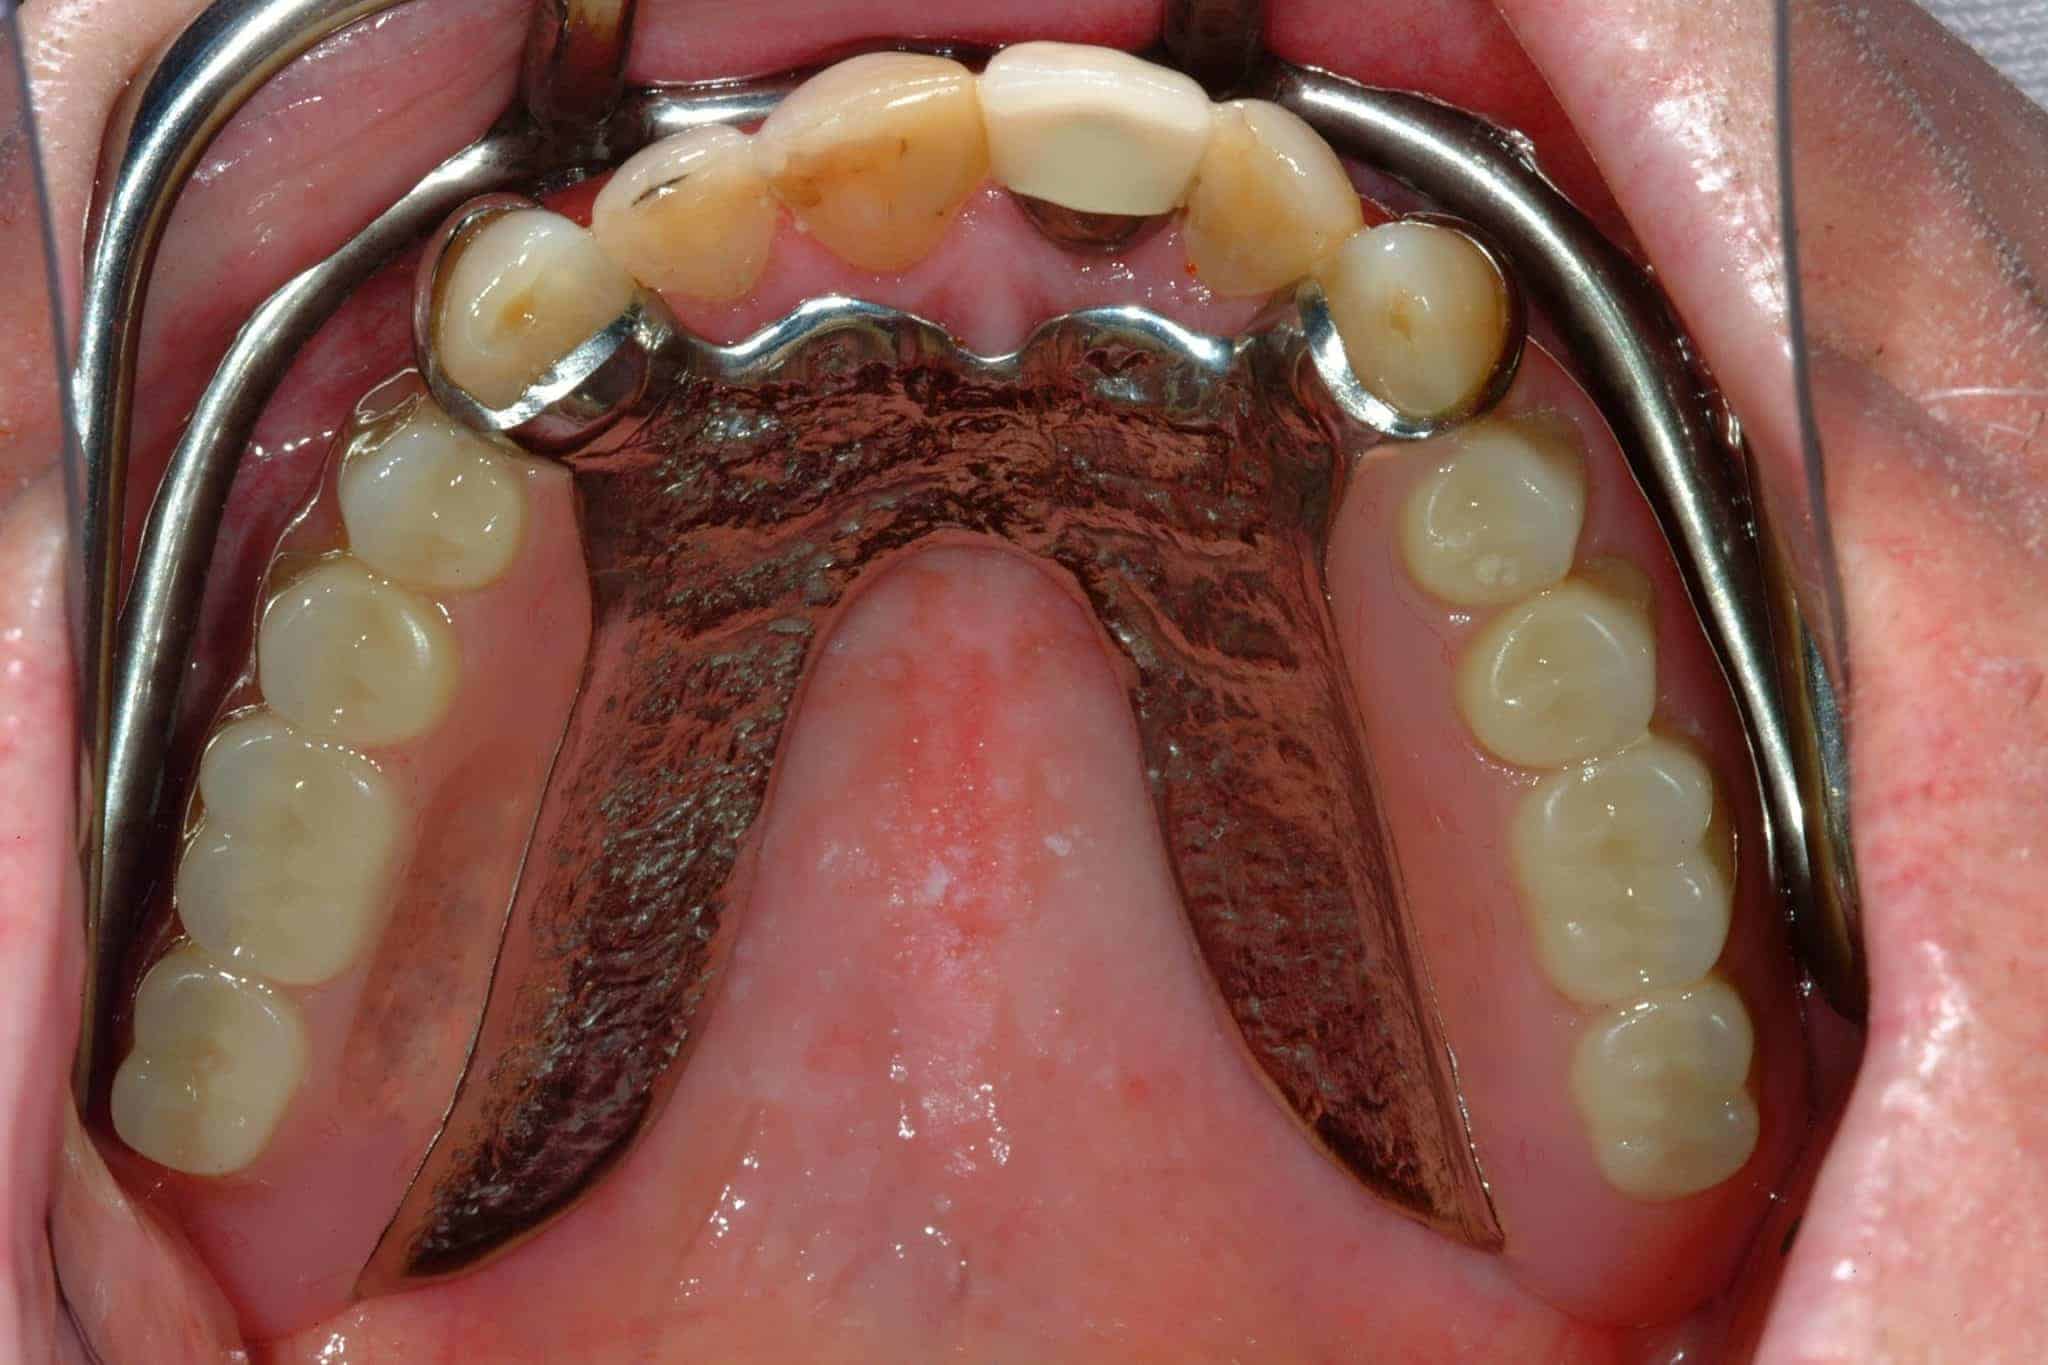 Bridges and Crowns After